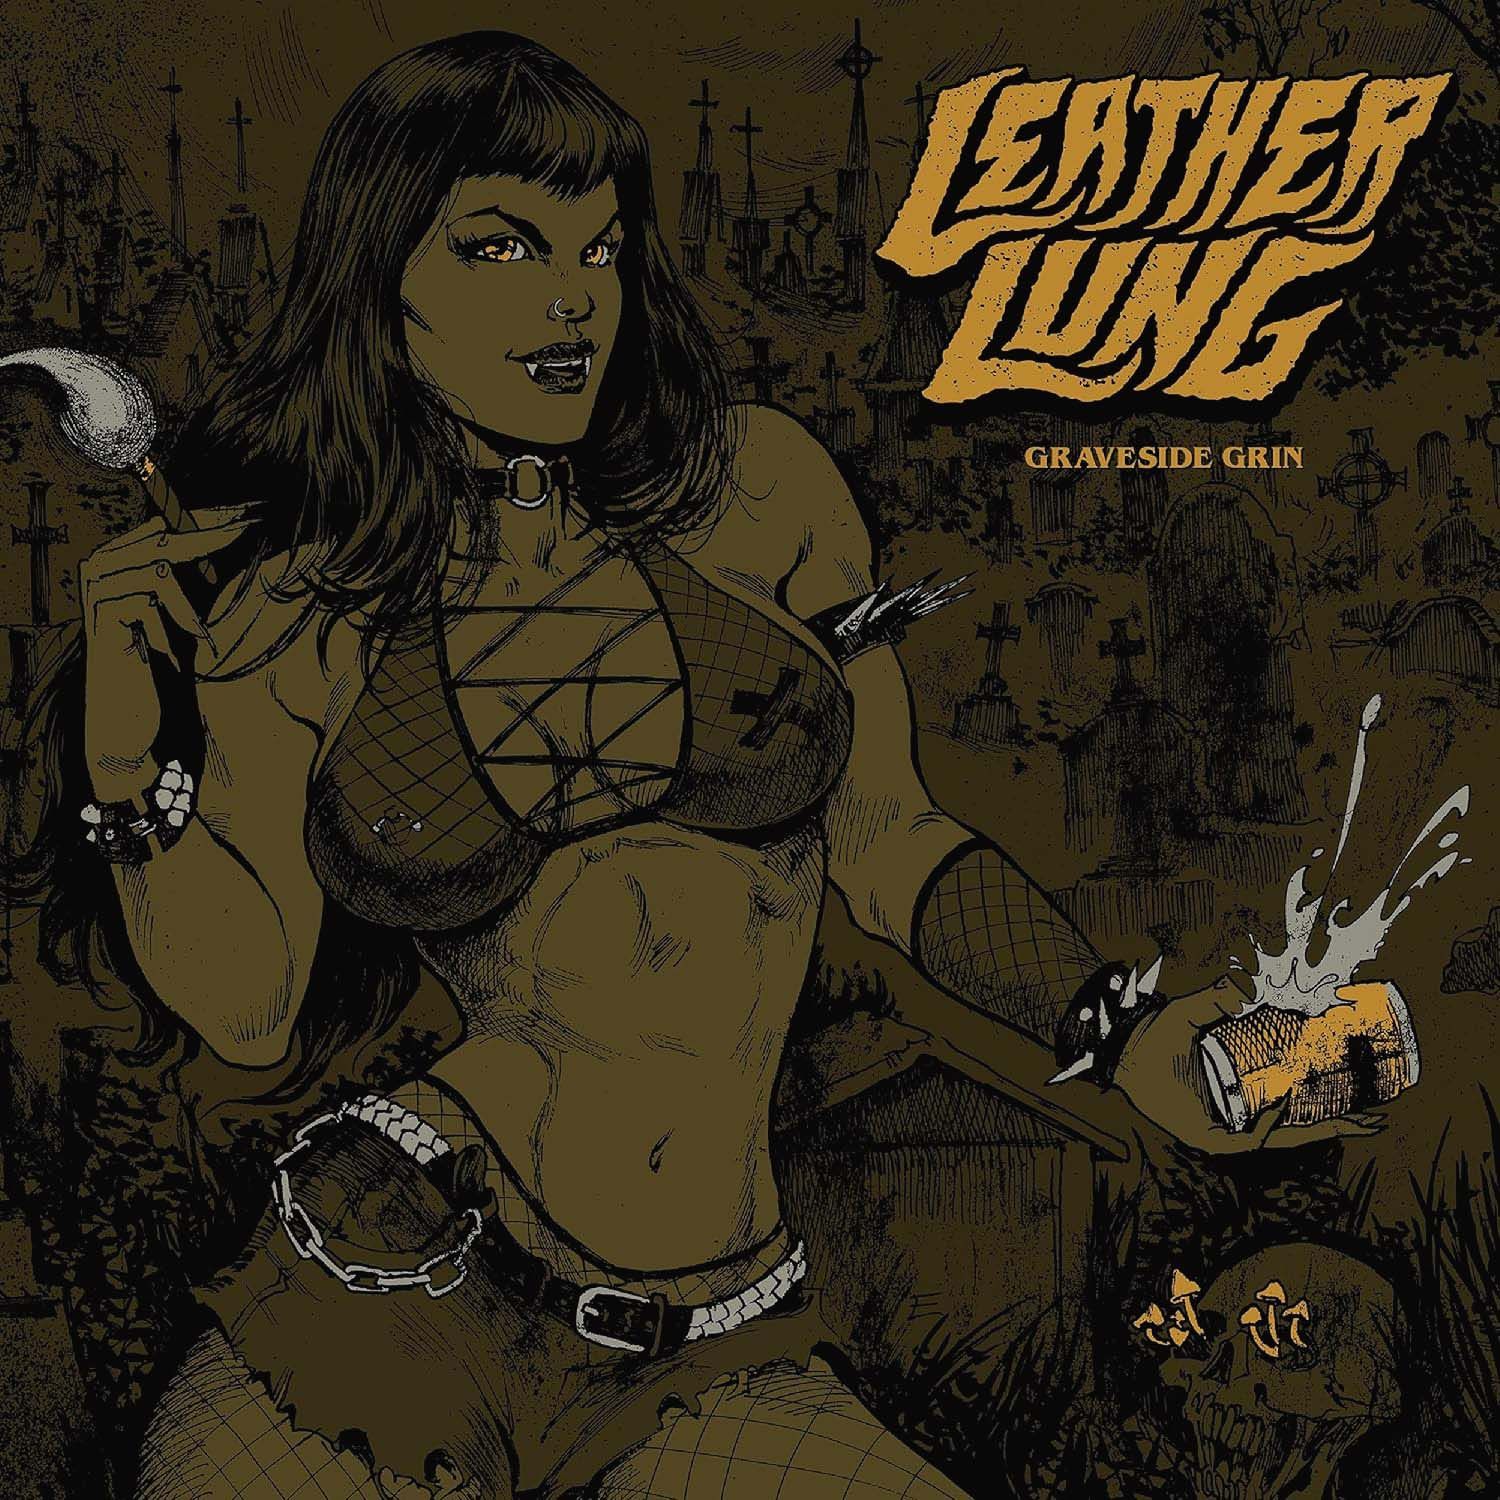 Leather Lung - Graveside Grin